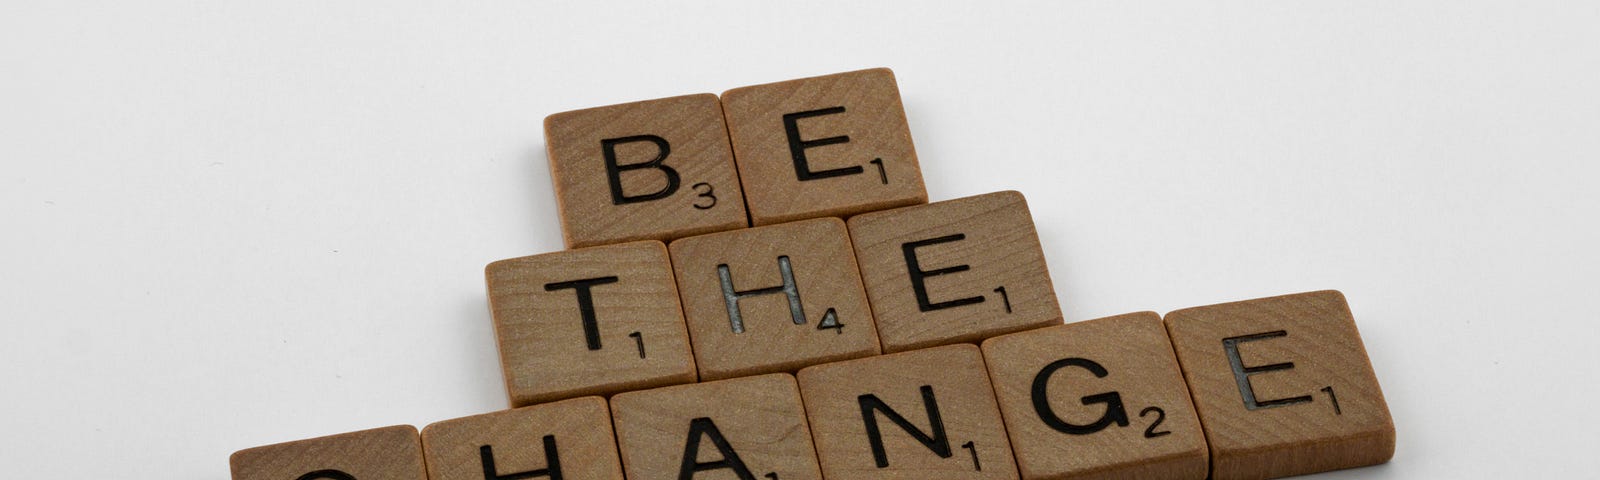 Scrabble tiles spell out “Be the Change.”